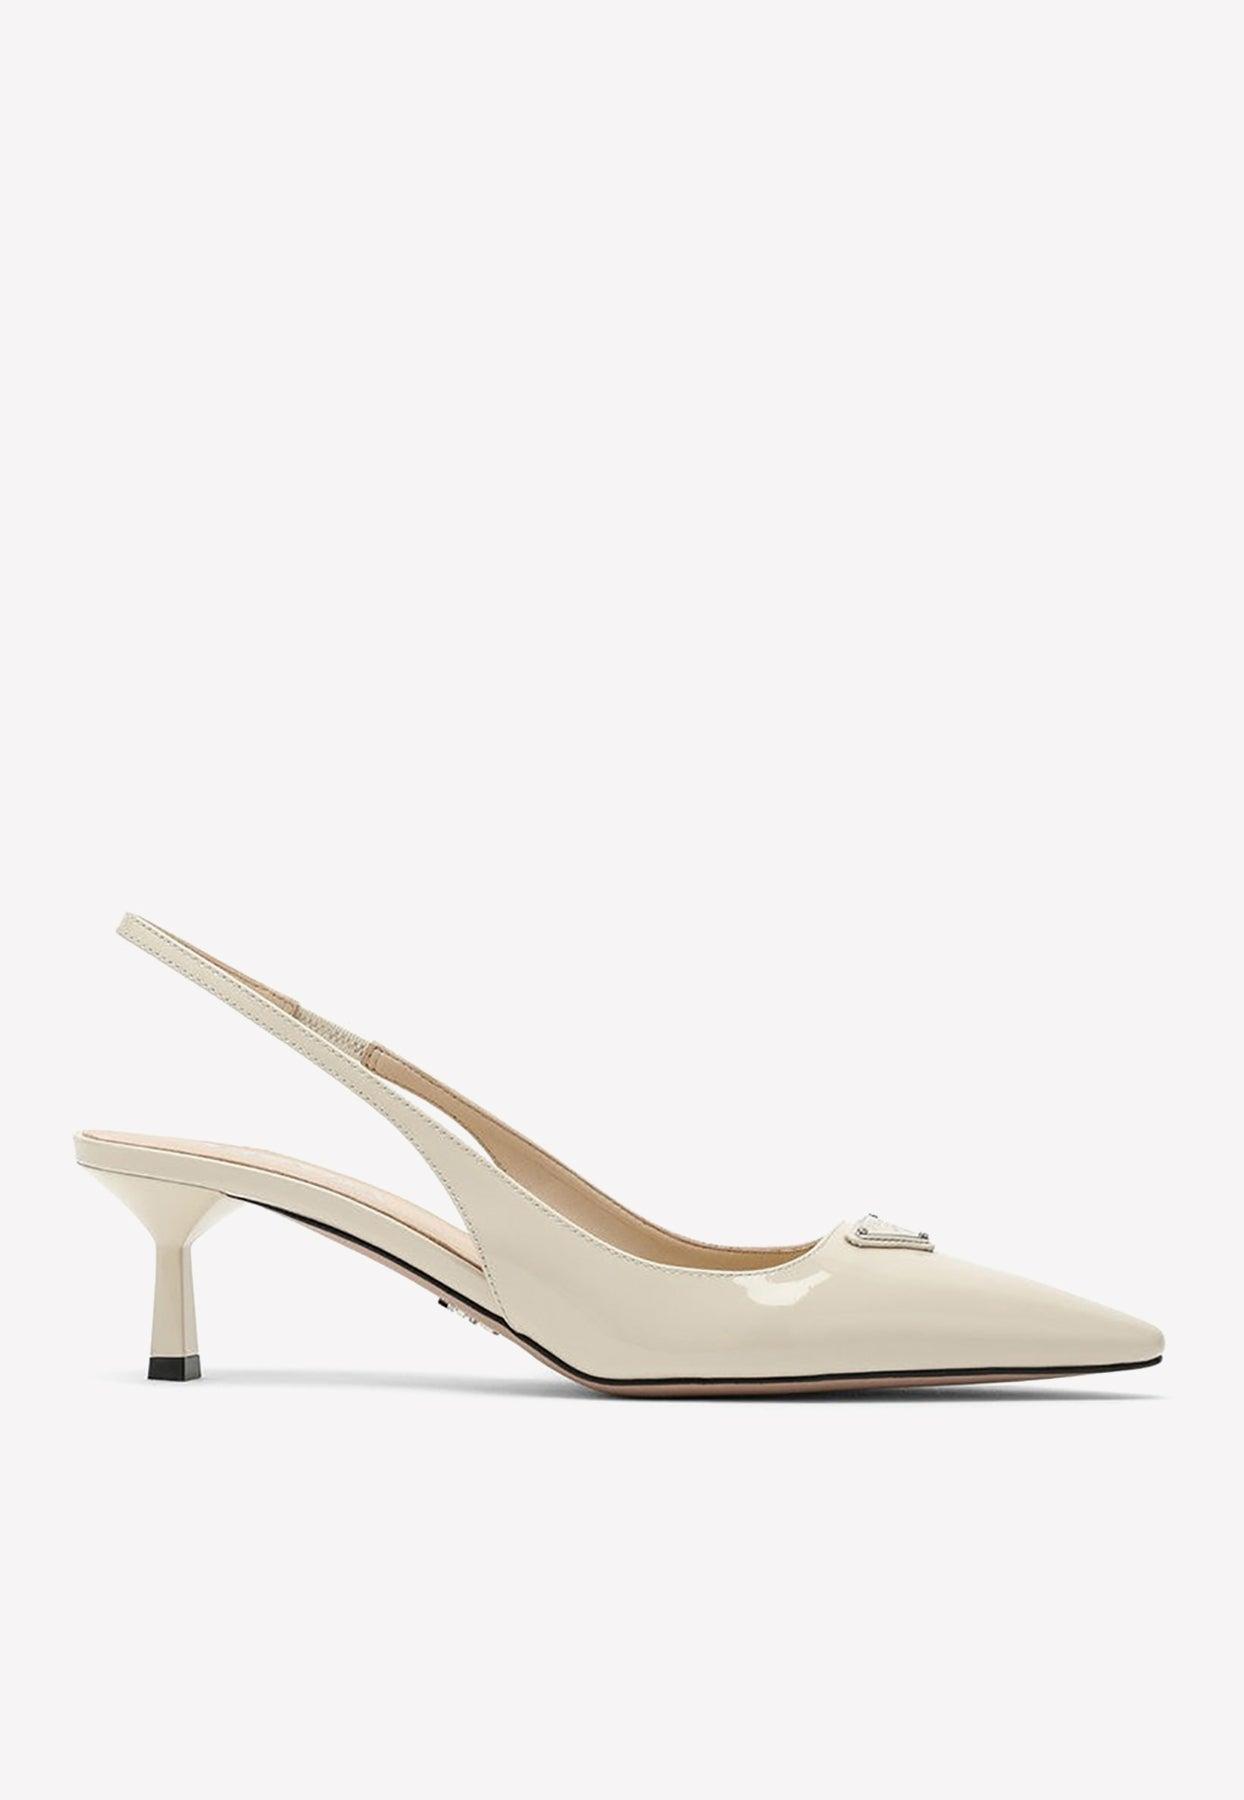 Prada 55 Patent Leather Slingback Pumps in White | Lyst